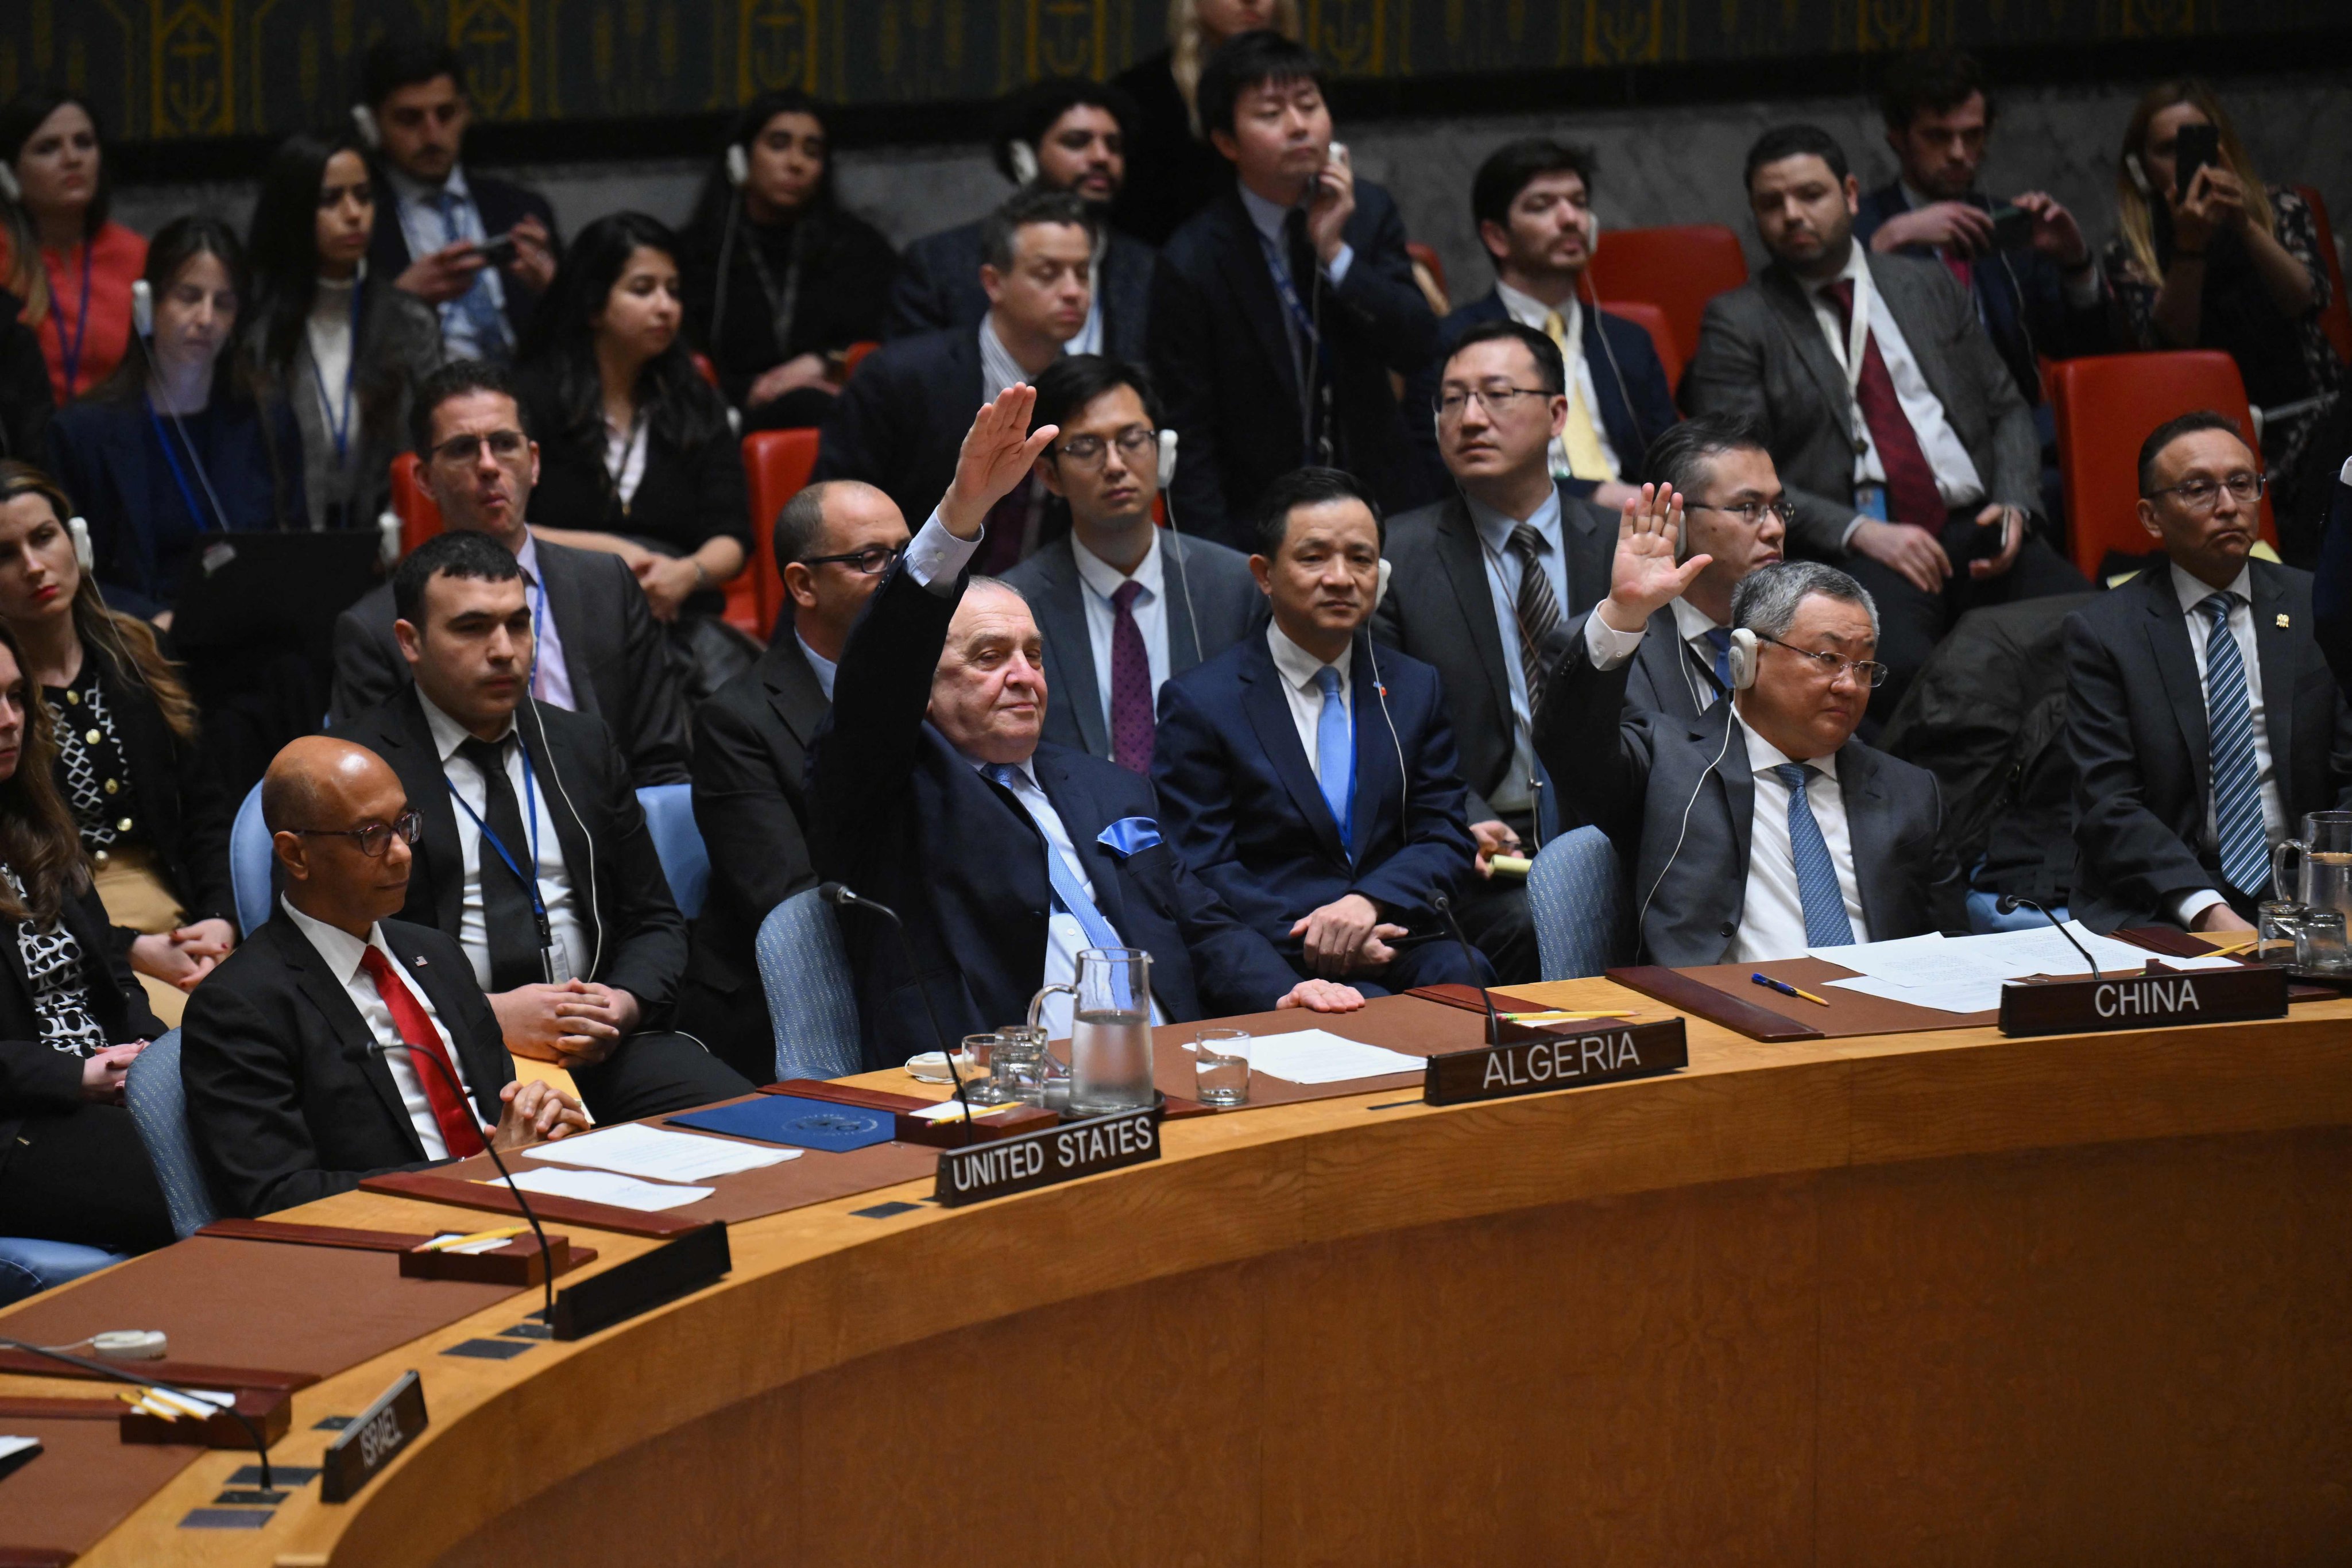 The UN Security Council votes on a resolution allowing Palestinian UN membership. Photo: AFP